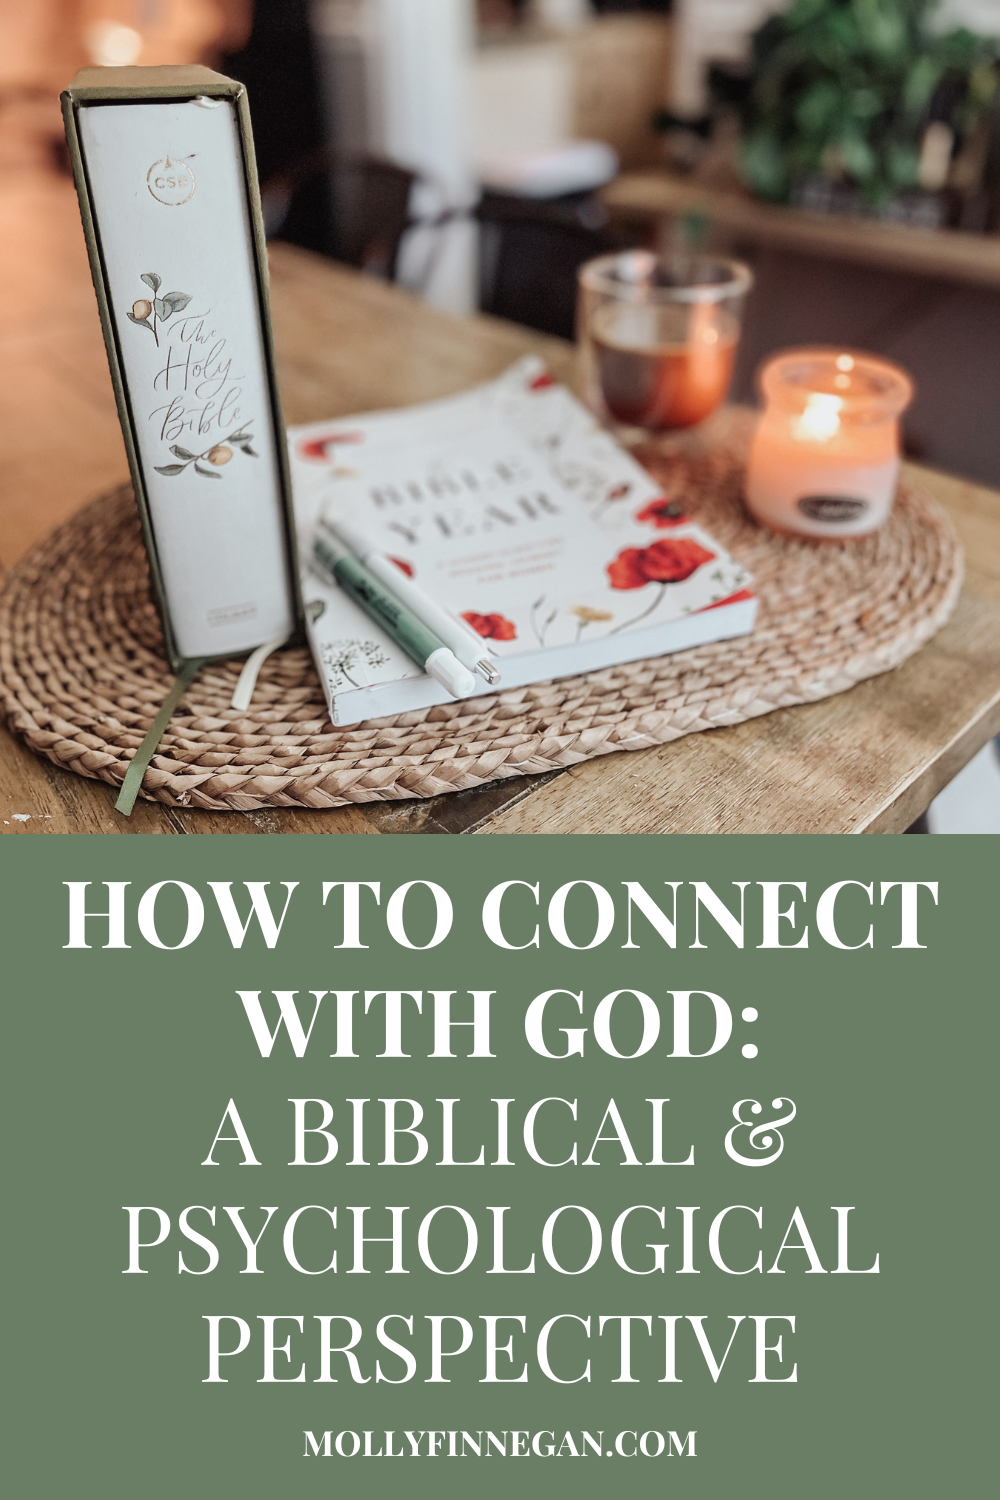 Blog Post Cover Image: bible, coffee, and candle on wooden dining table